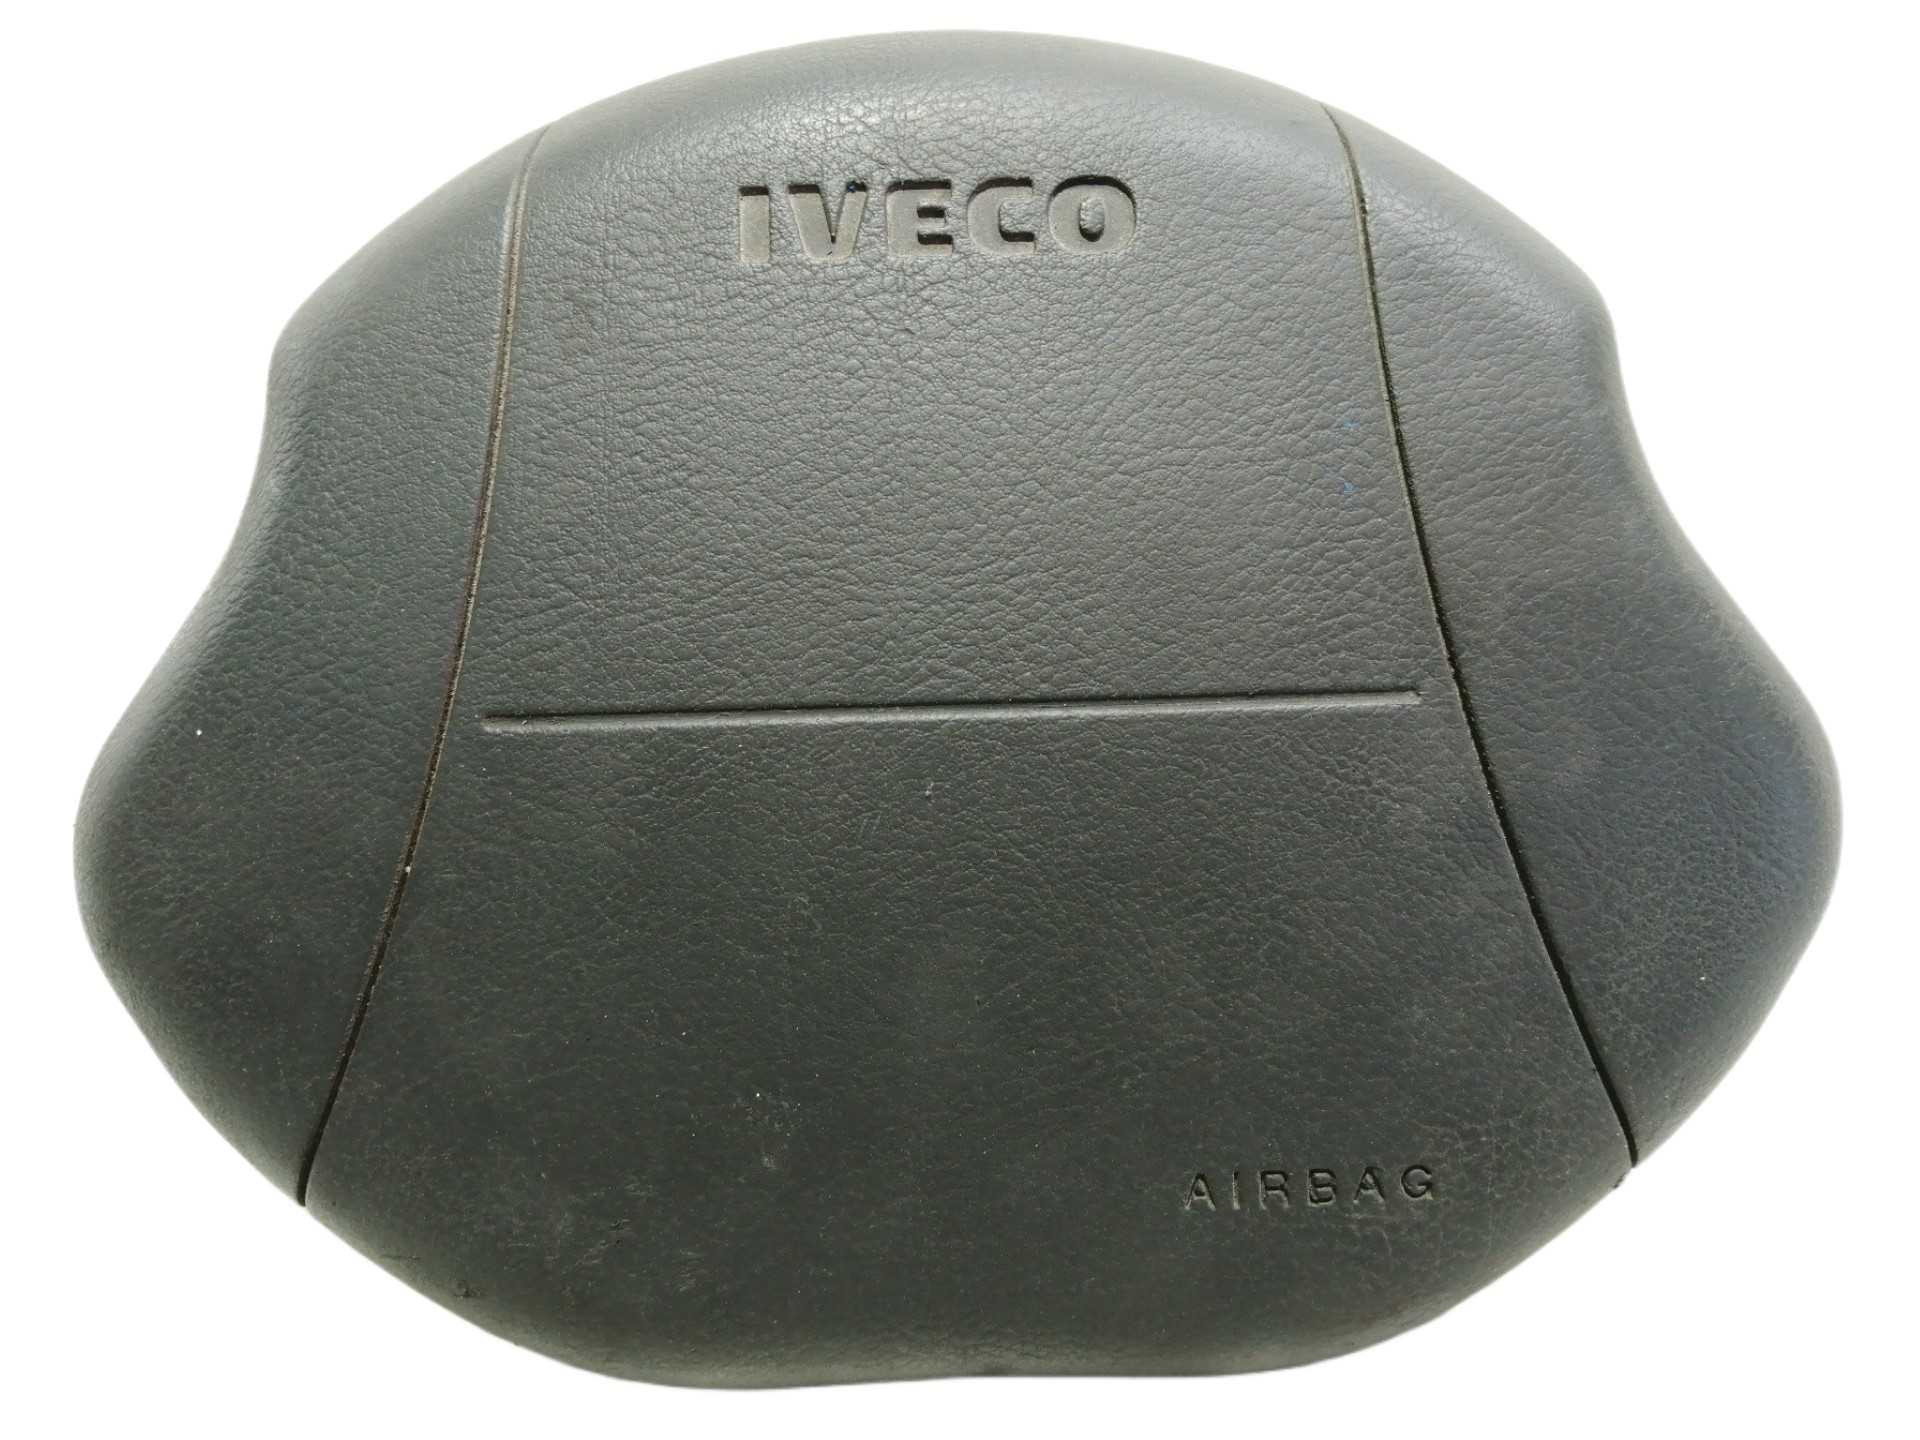 Iveco Algemeen AIRBAG VOLANTE 500331825/S001313398/010443120160/30003033A